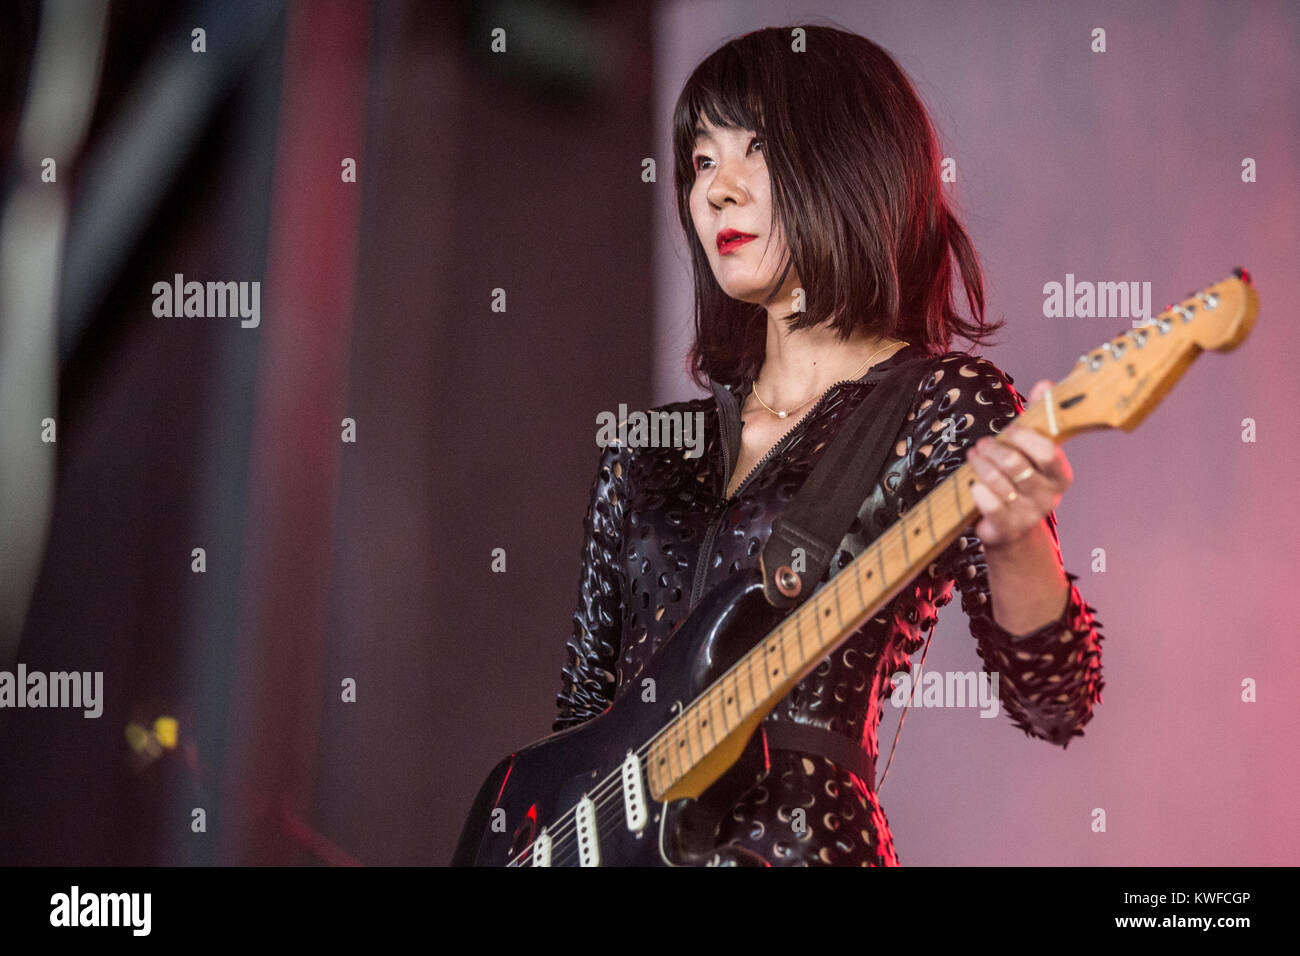 The American singer, songwriter and musician St. Vincent and performs a live concert at the Arena Stage at Danish music festival Roskilde Festival 2015. Here live band member Toko Yasuda is pictured live on stage. Denmark, 02/07 2015. Stock Photo